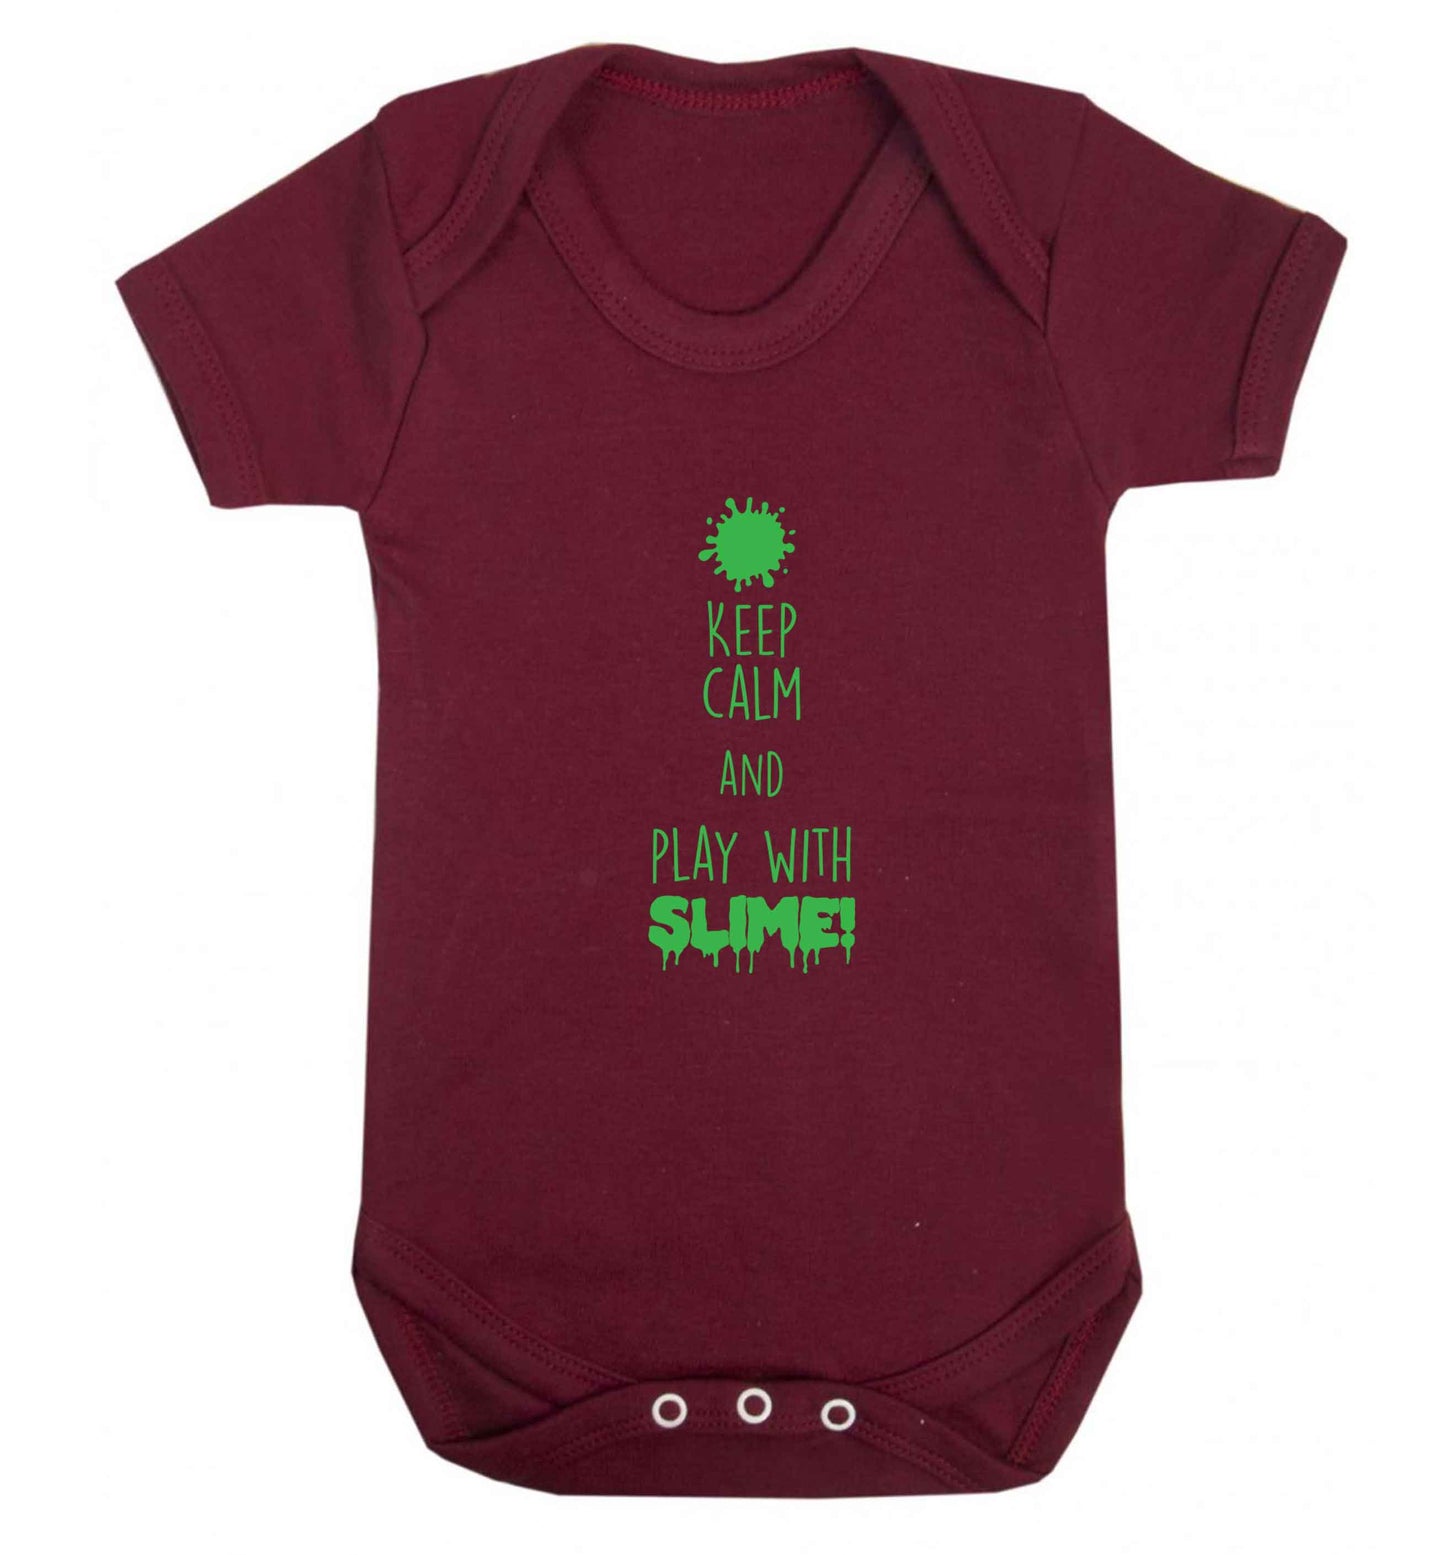 Neon green keep calm and play with slime!baby vest maroon 18-24 months